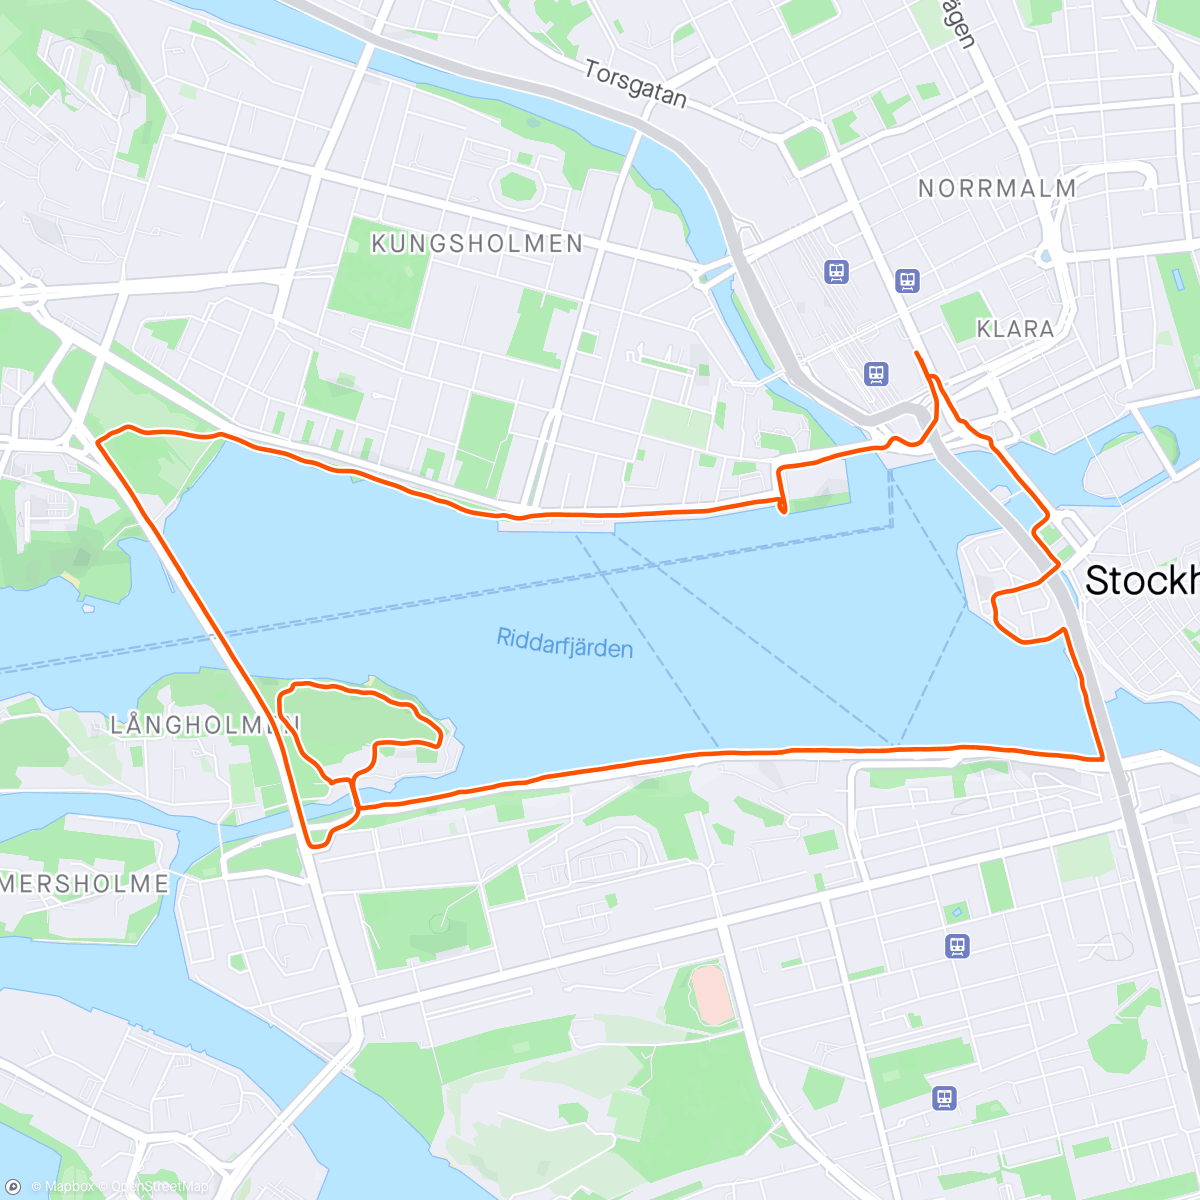 Map of the activity, Morning Trail Run in Stockholm! Blimey🥶!🤣
Started the run with freezing rain which turned to 🌨️❄️ then back to rain. Nice little discovery run before breakfast and long road trip ahead!